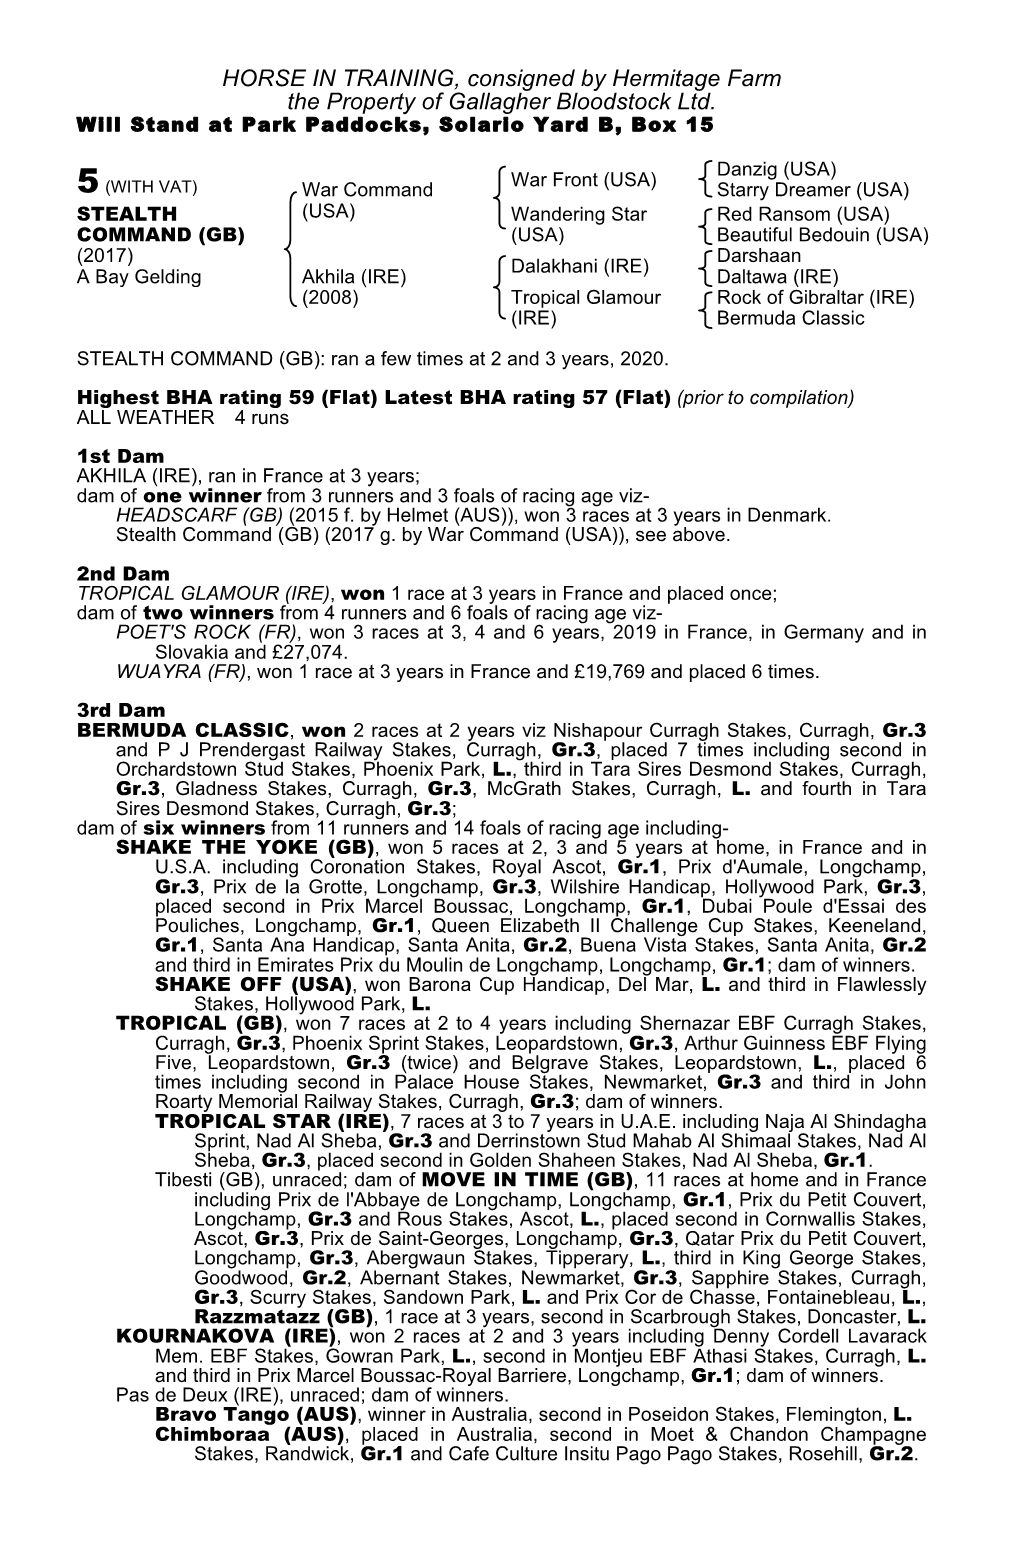 HORSE in TRAINING, Consigned by Hermitage Farm the Property of Gallagher Bloodstock Ltd